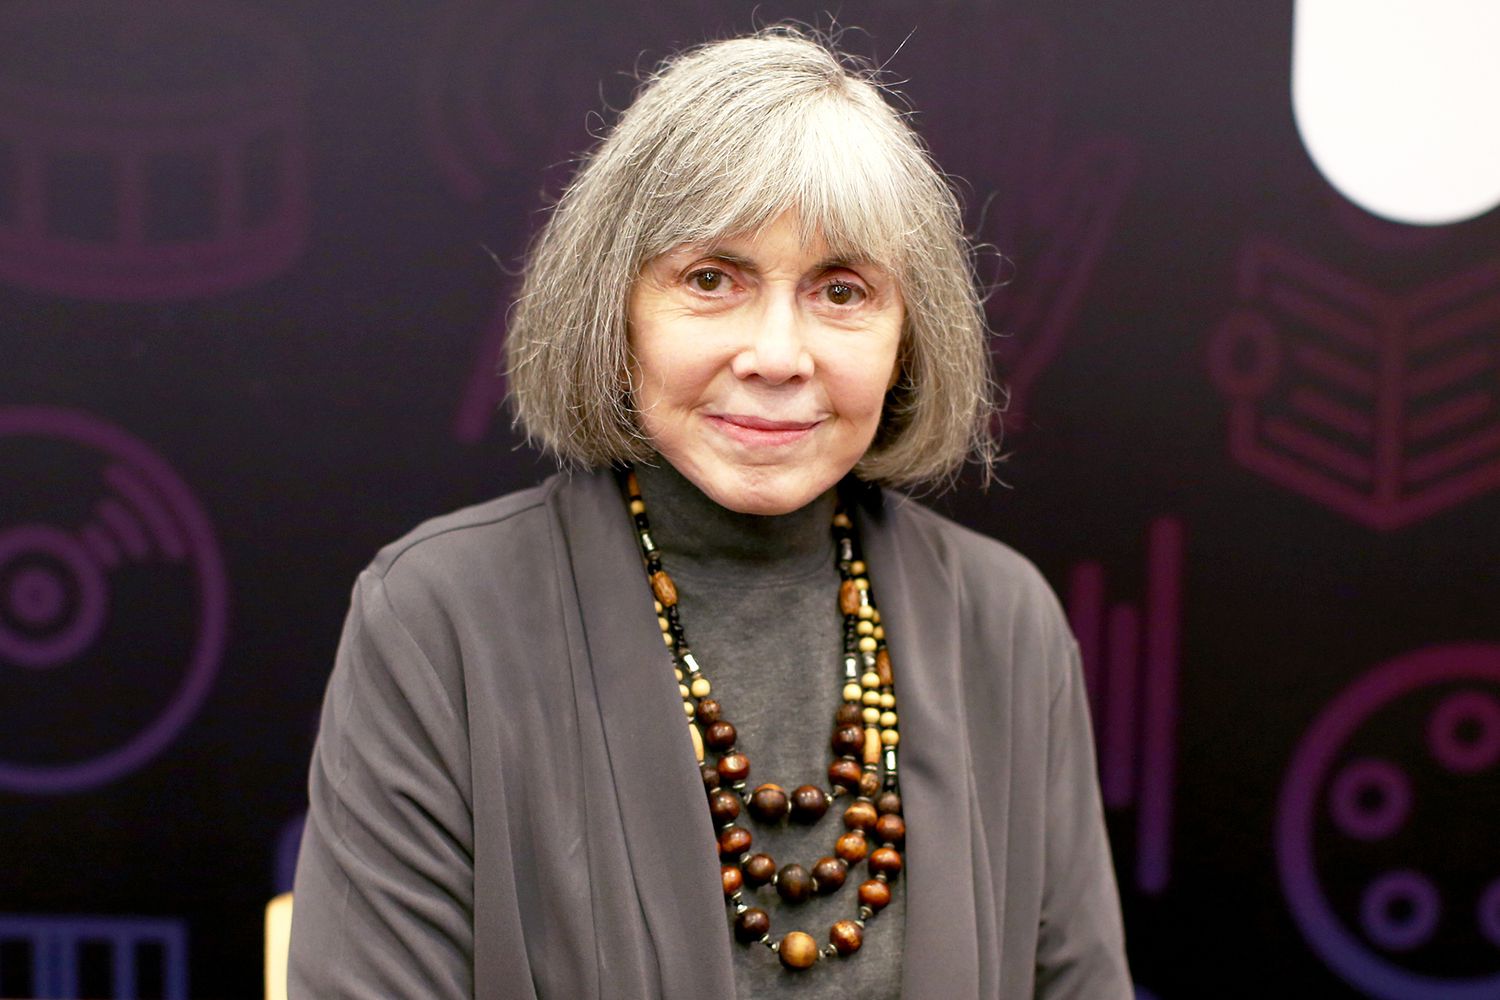 Author Anne Rice signs books during Entertainment Weekly's PopFest at The Reef on October 29, 2016 in Los Angeles, California.